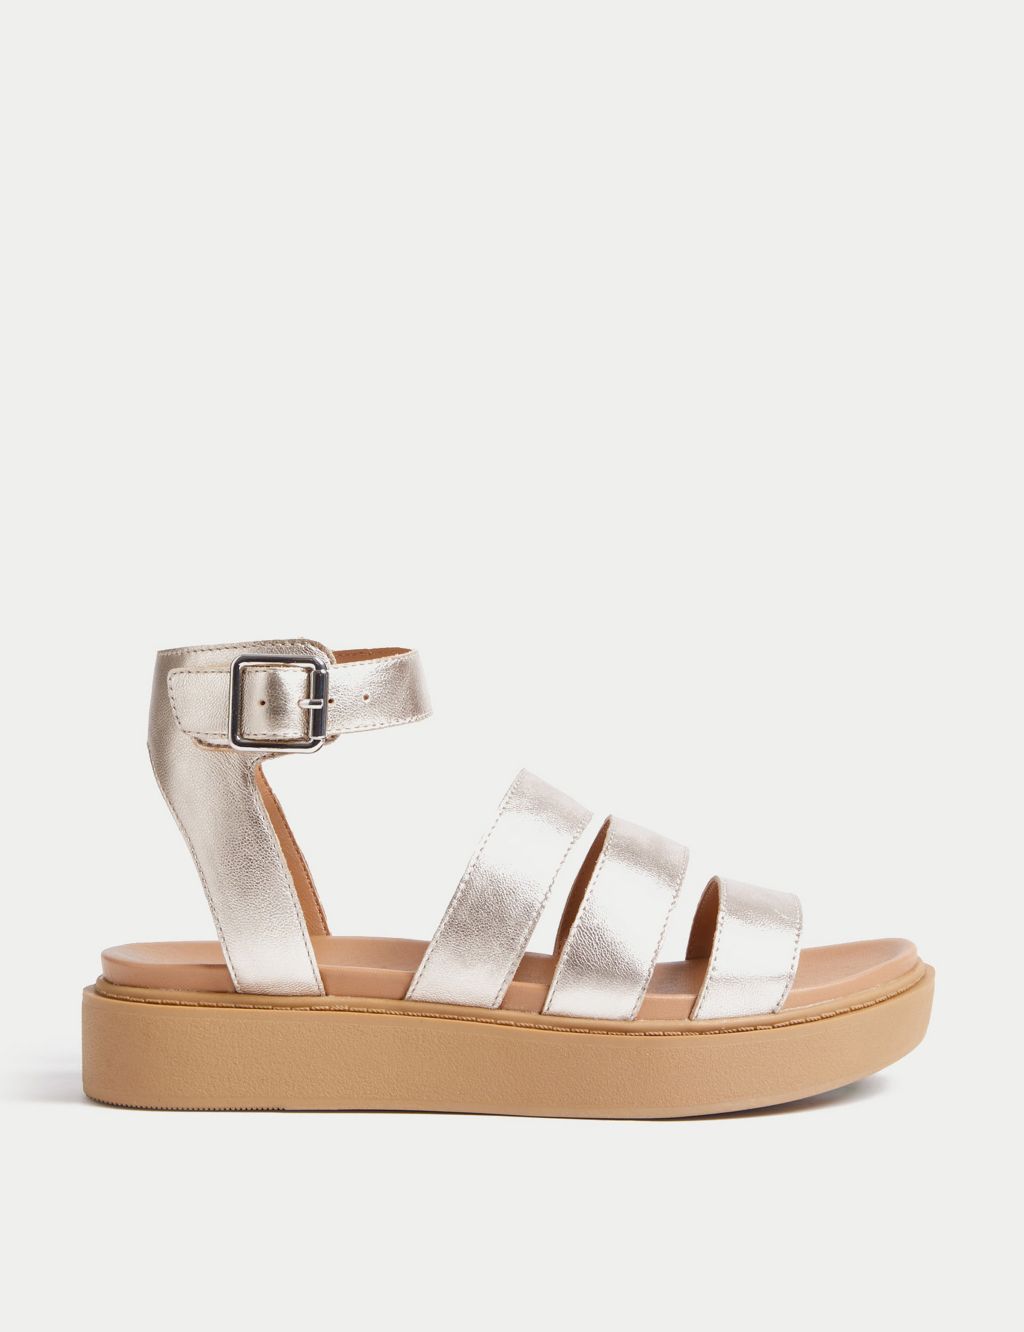 Leather Ankle Strap Flat Sandals image 1